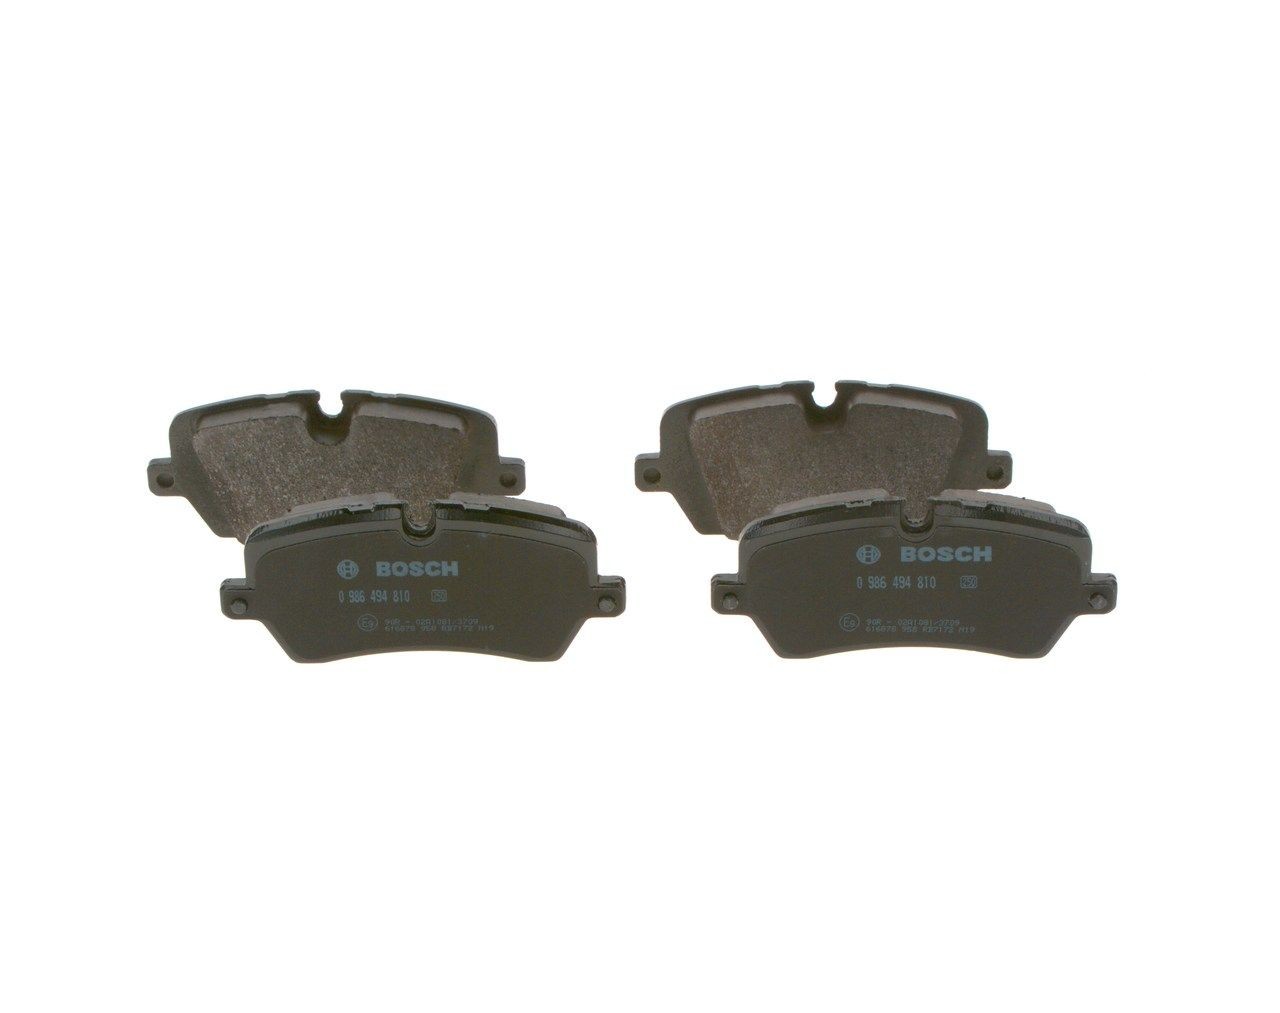 0986494810 Set of brake pads 25720 BOSCH Low-Metallic, with anti-squeak plate, with mounting manual